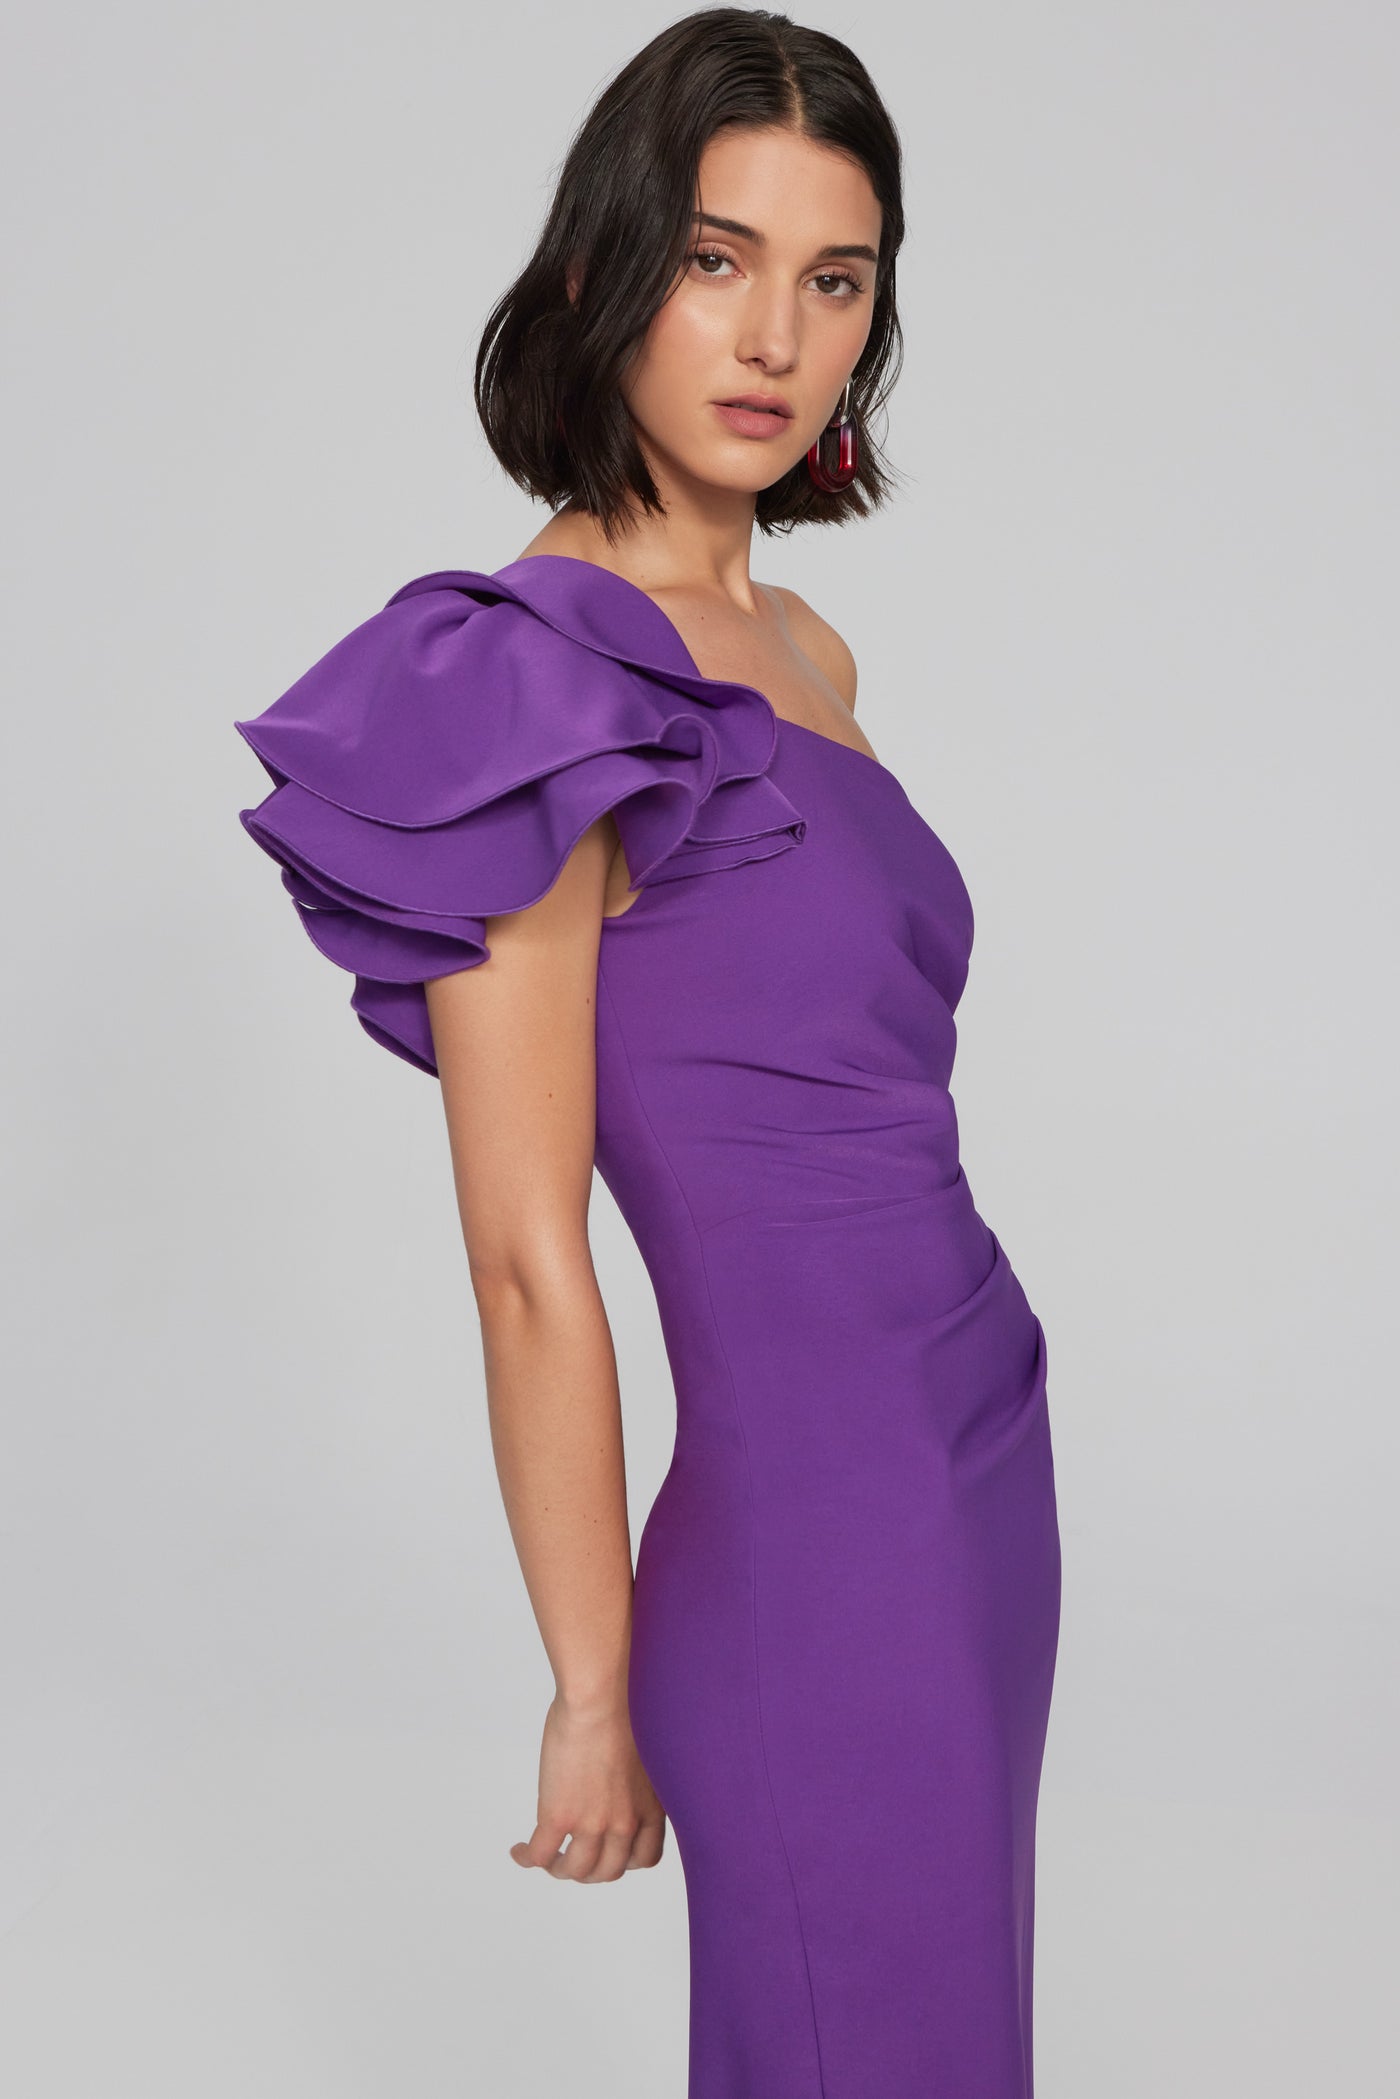 Joseph Ribkoff Purple One Shouldered Dress with Frill Detail